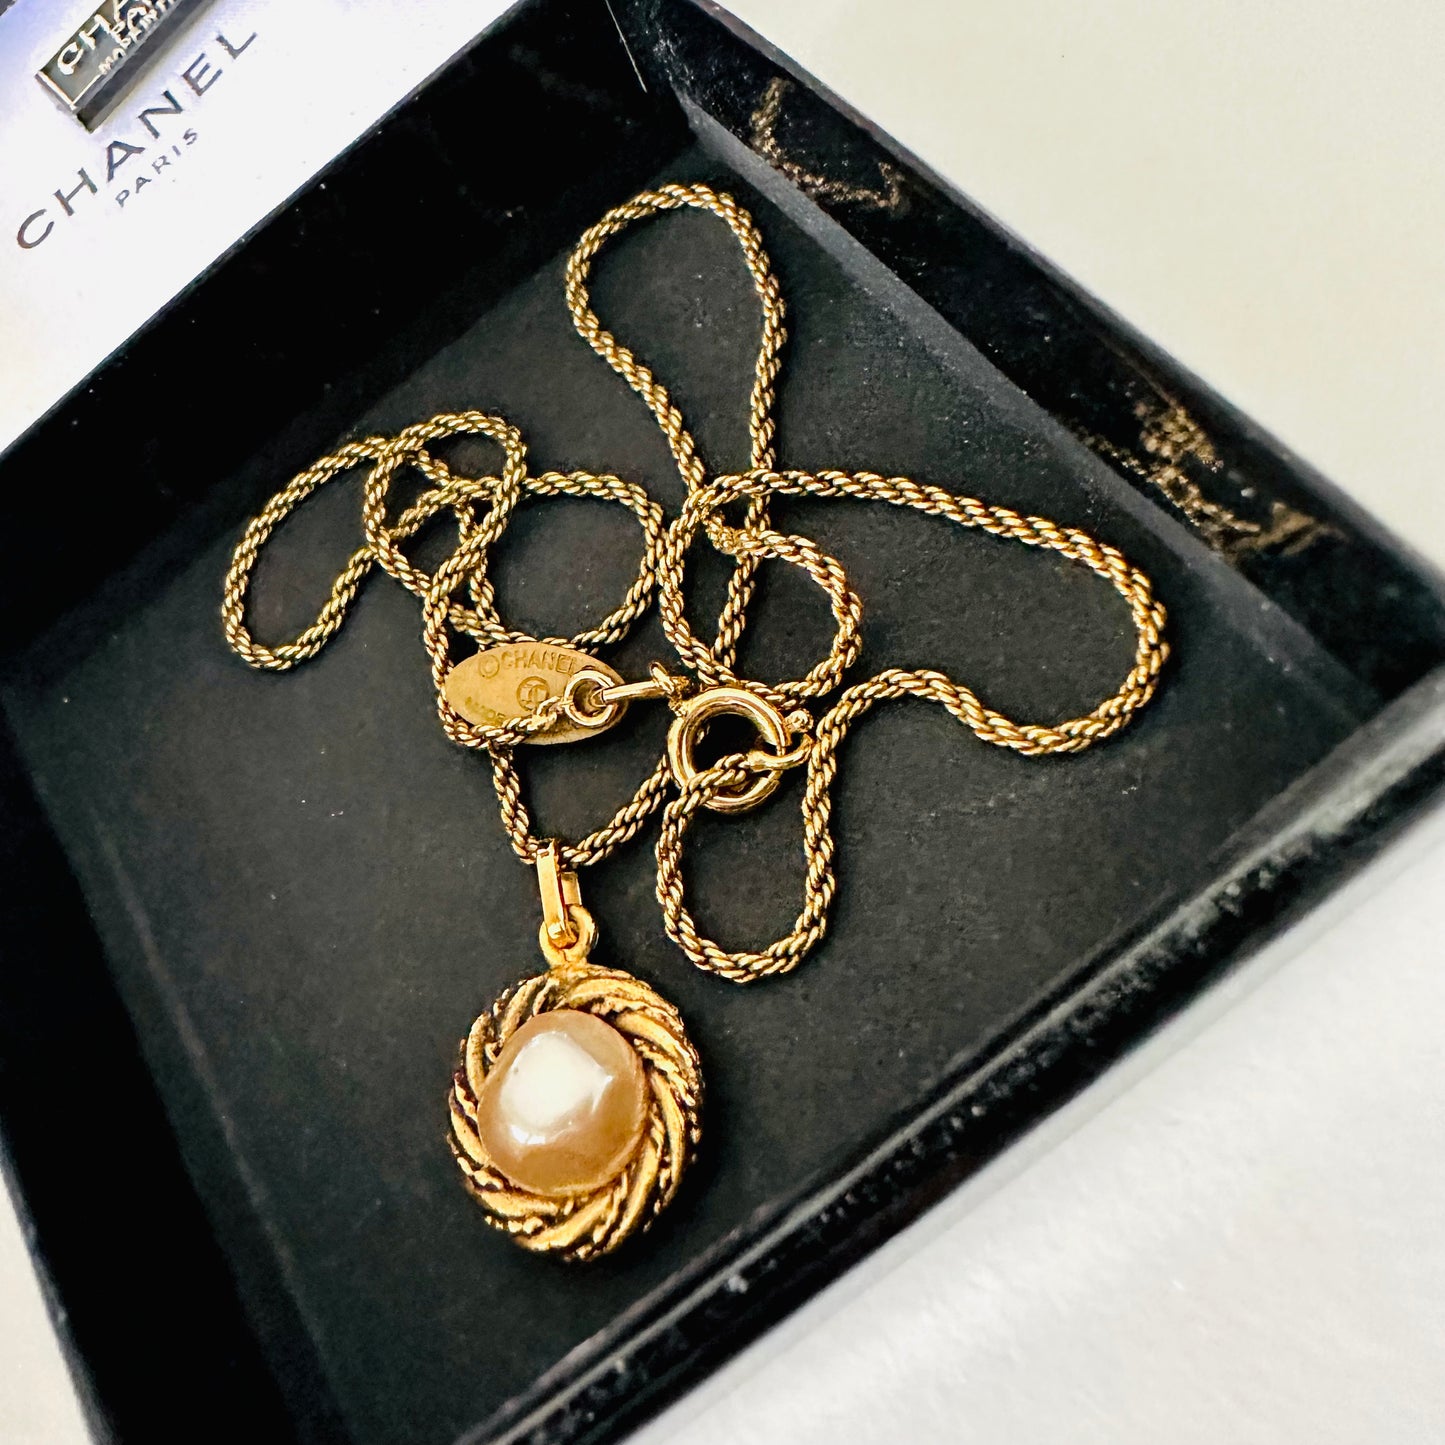 Chanel CC Spiral Pearl Pendant Gold Chain Signature Vintage Necklace